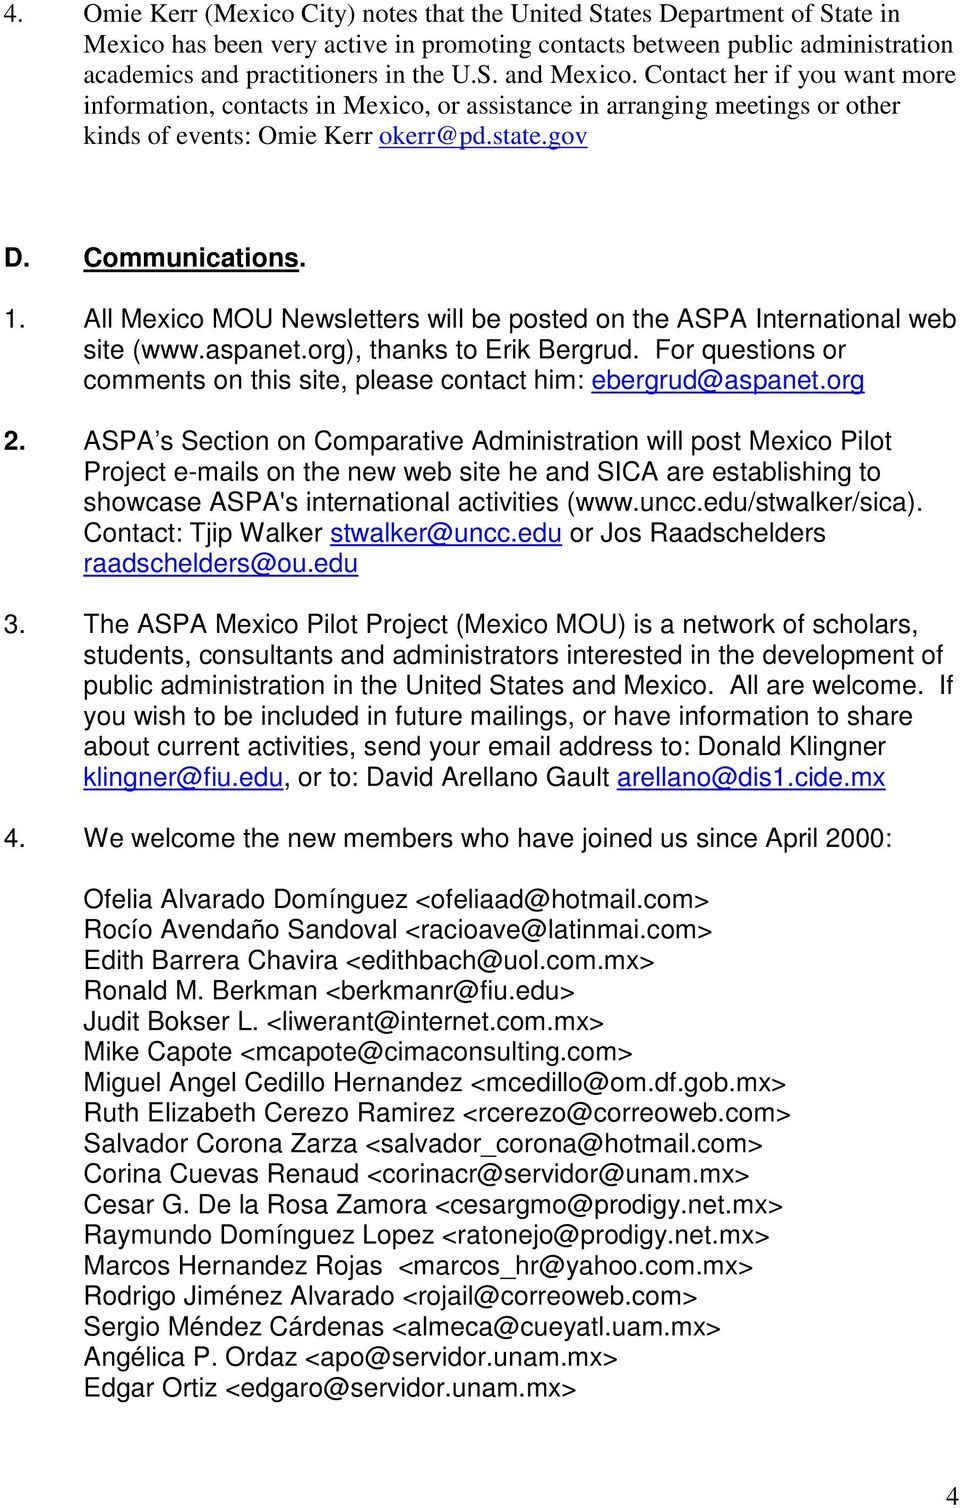 All Mexico MOU Newsletters will be posted on the ASPA International web site (www.aspanet.org), thanks to Erik Bergrud. For questions or comments on this site, please contact him: ebergrud@aspanet.